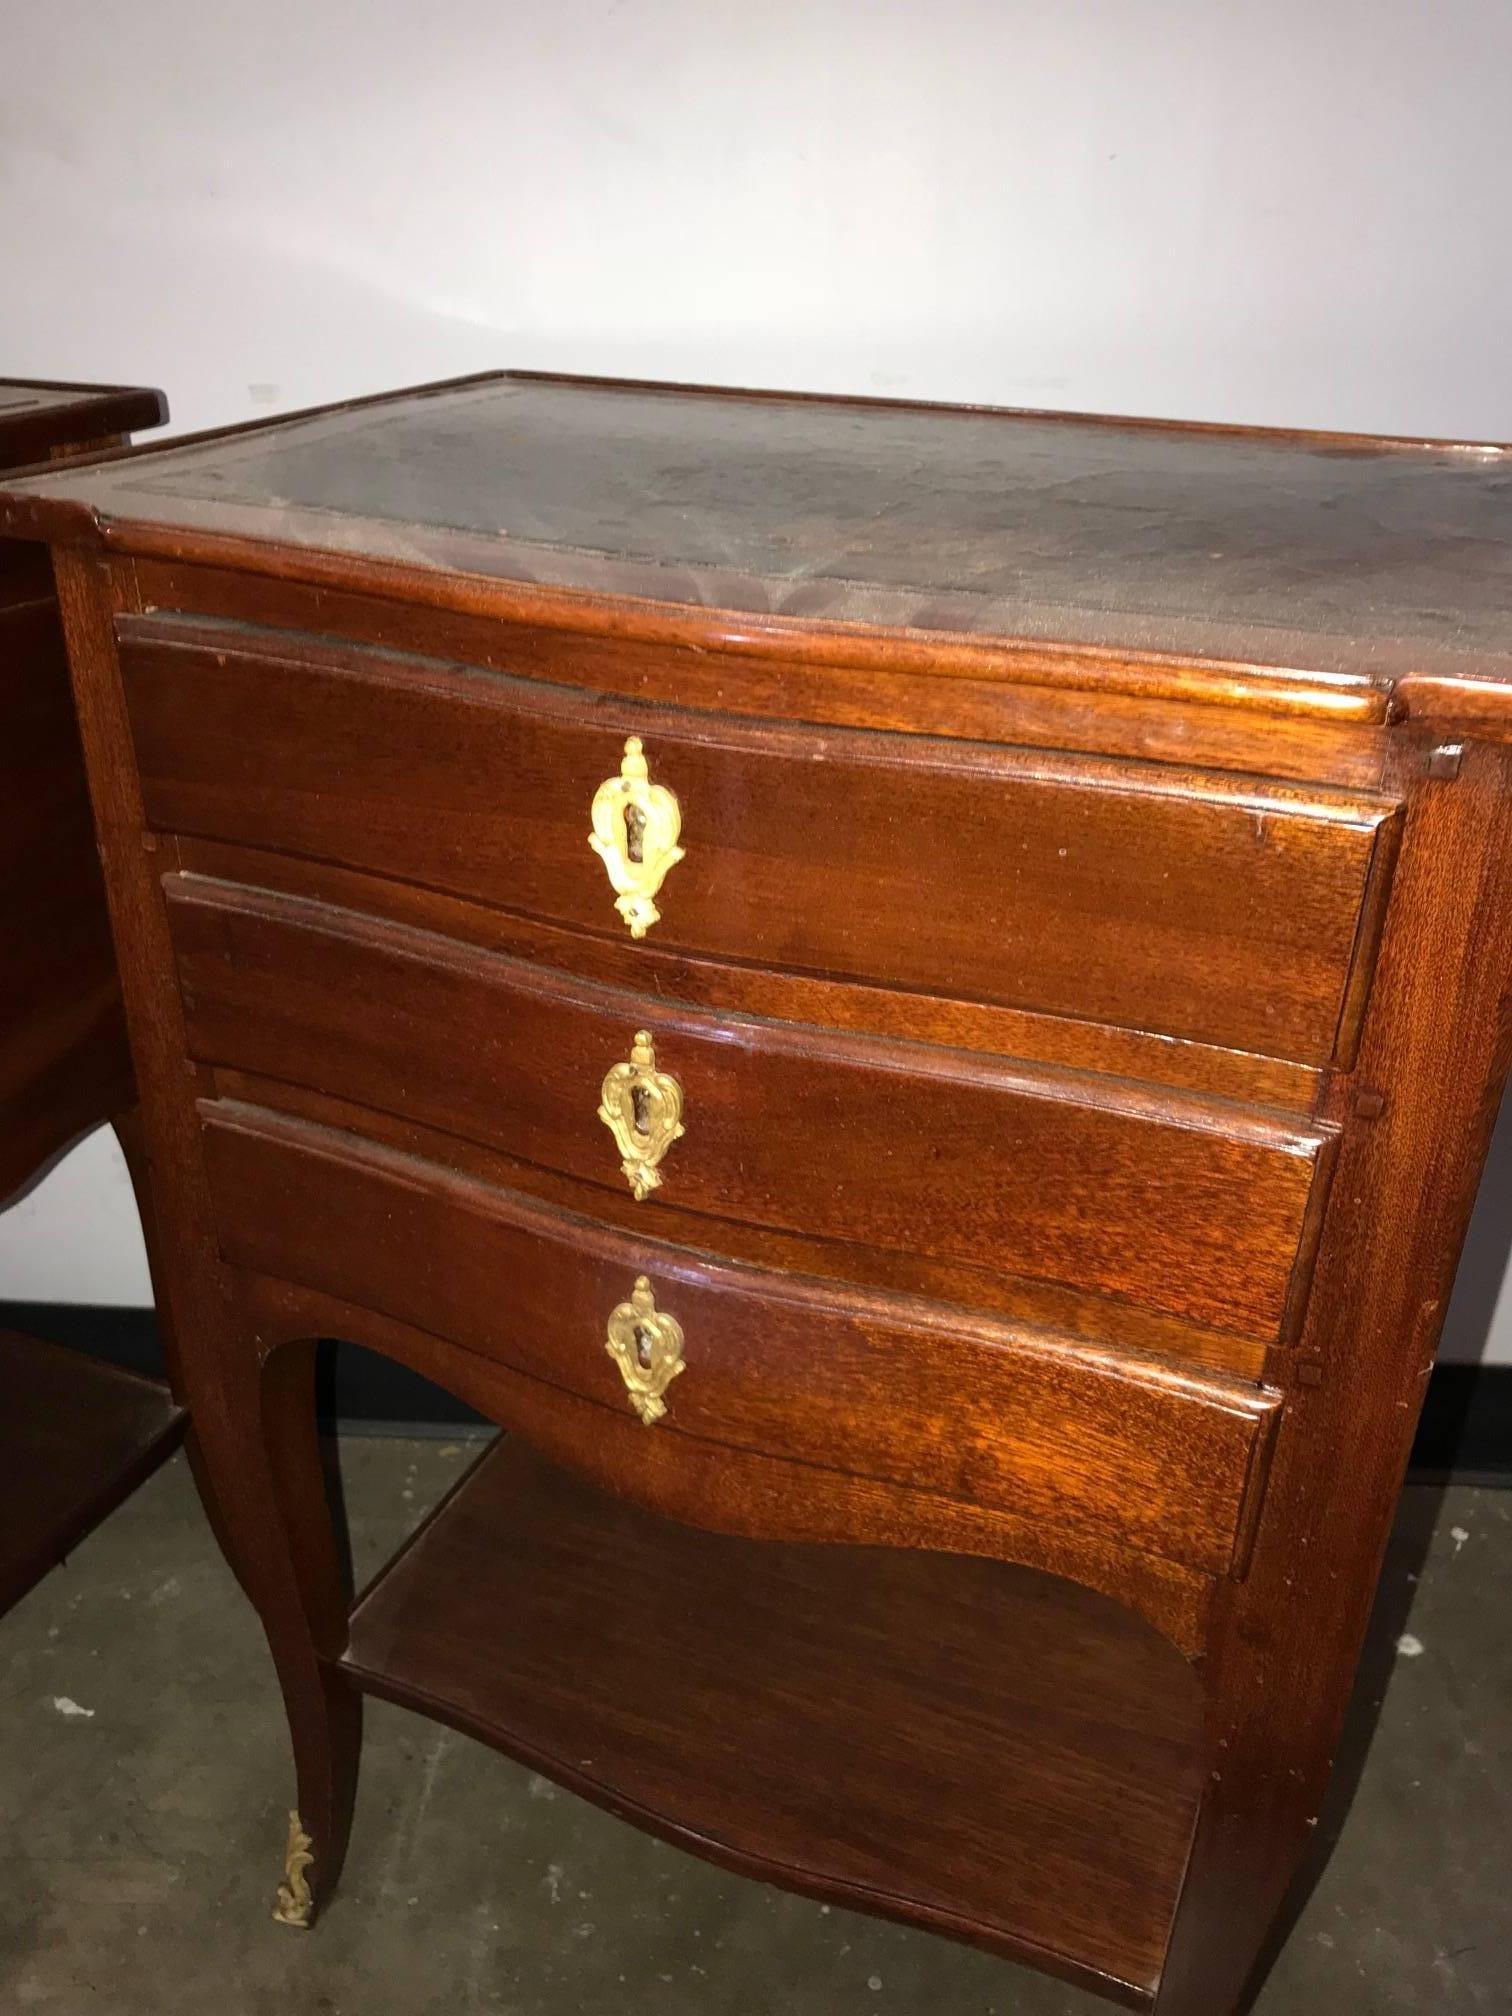 Attractive pair of French Louis XV style mahogany shaped front side tables or night stands fitted with three drawers with gold gilt ormolu escutcheons and having a lower tier. The entire on slender cabriole legs ending in gilded bronze